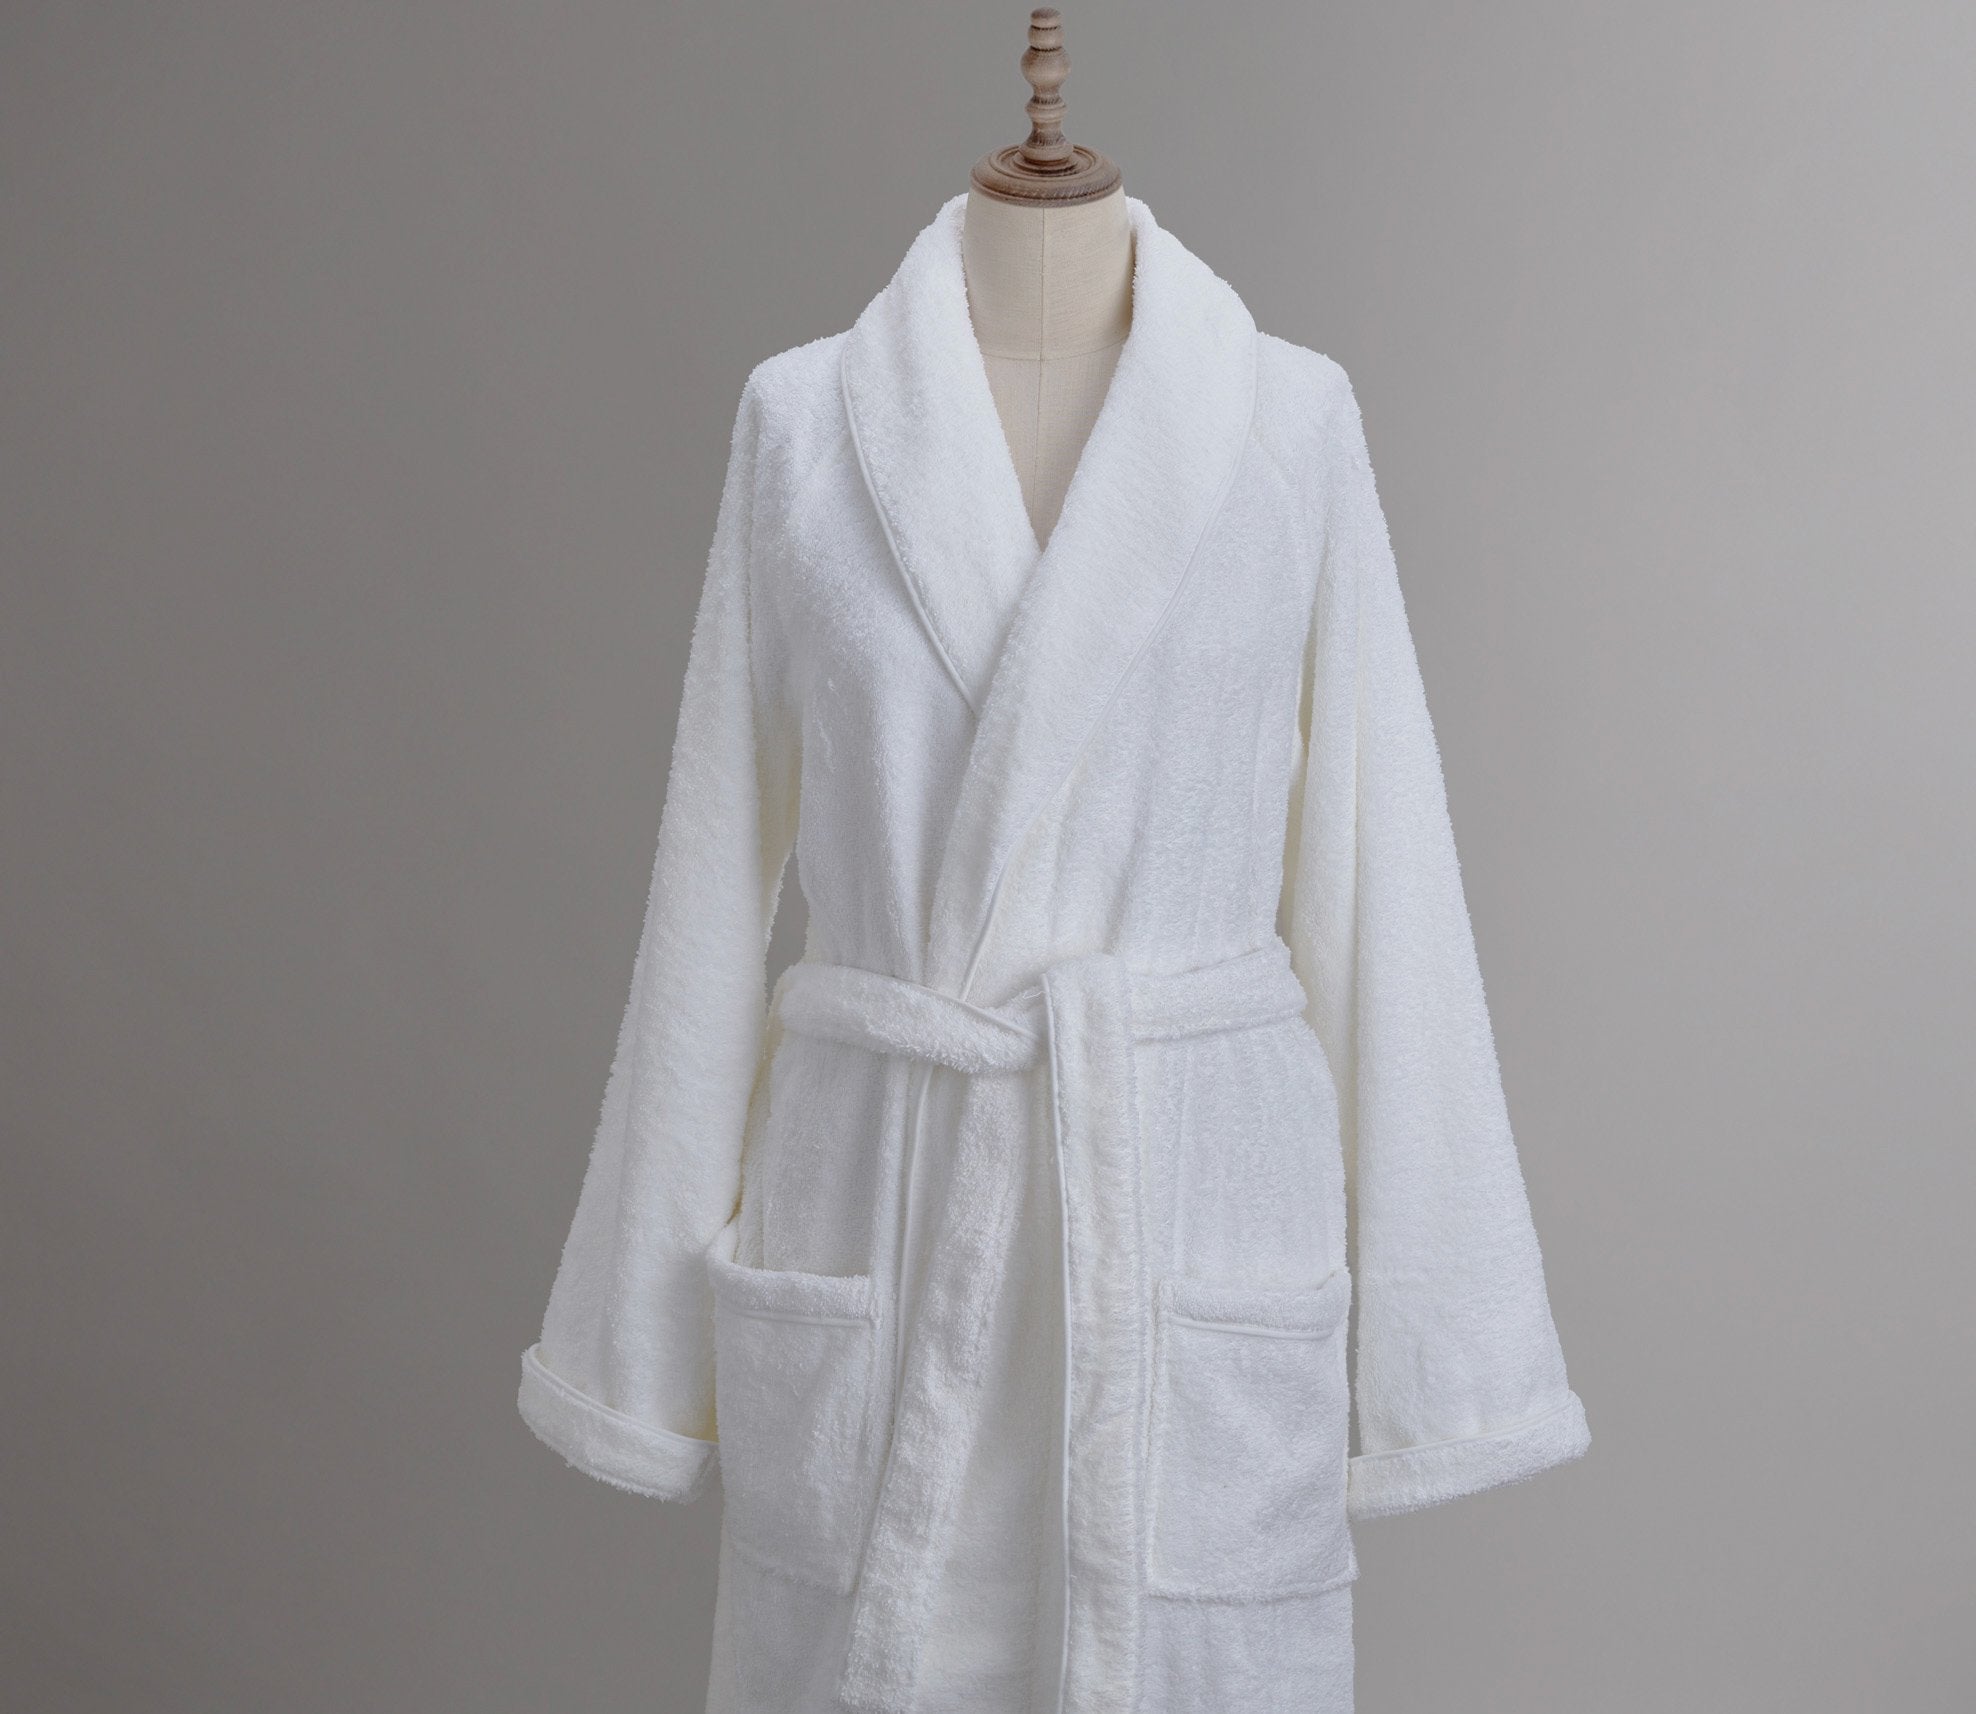 Cairo Robe White Small Product Image 1